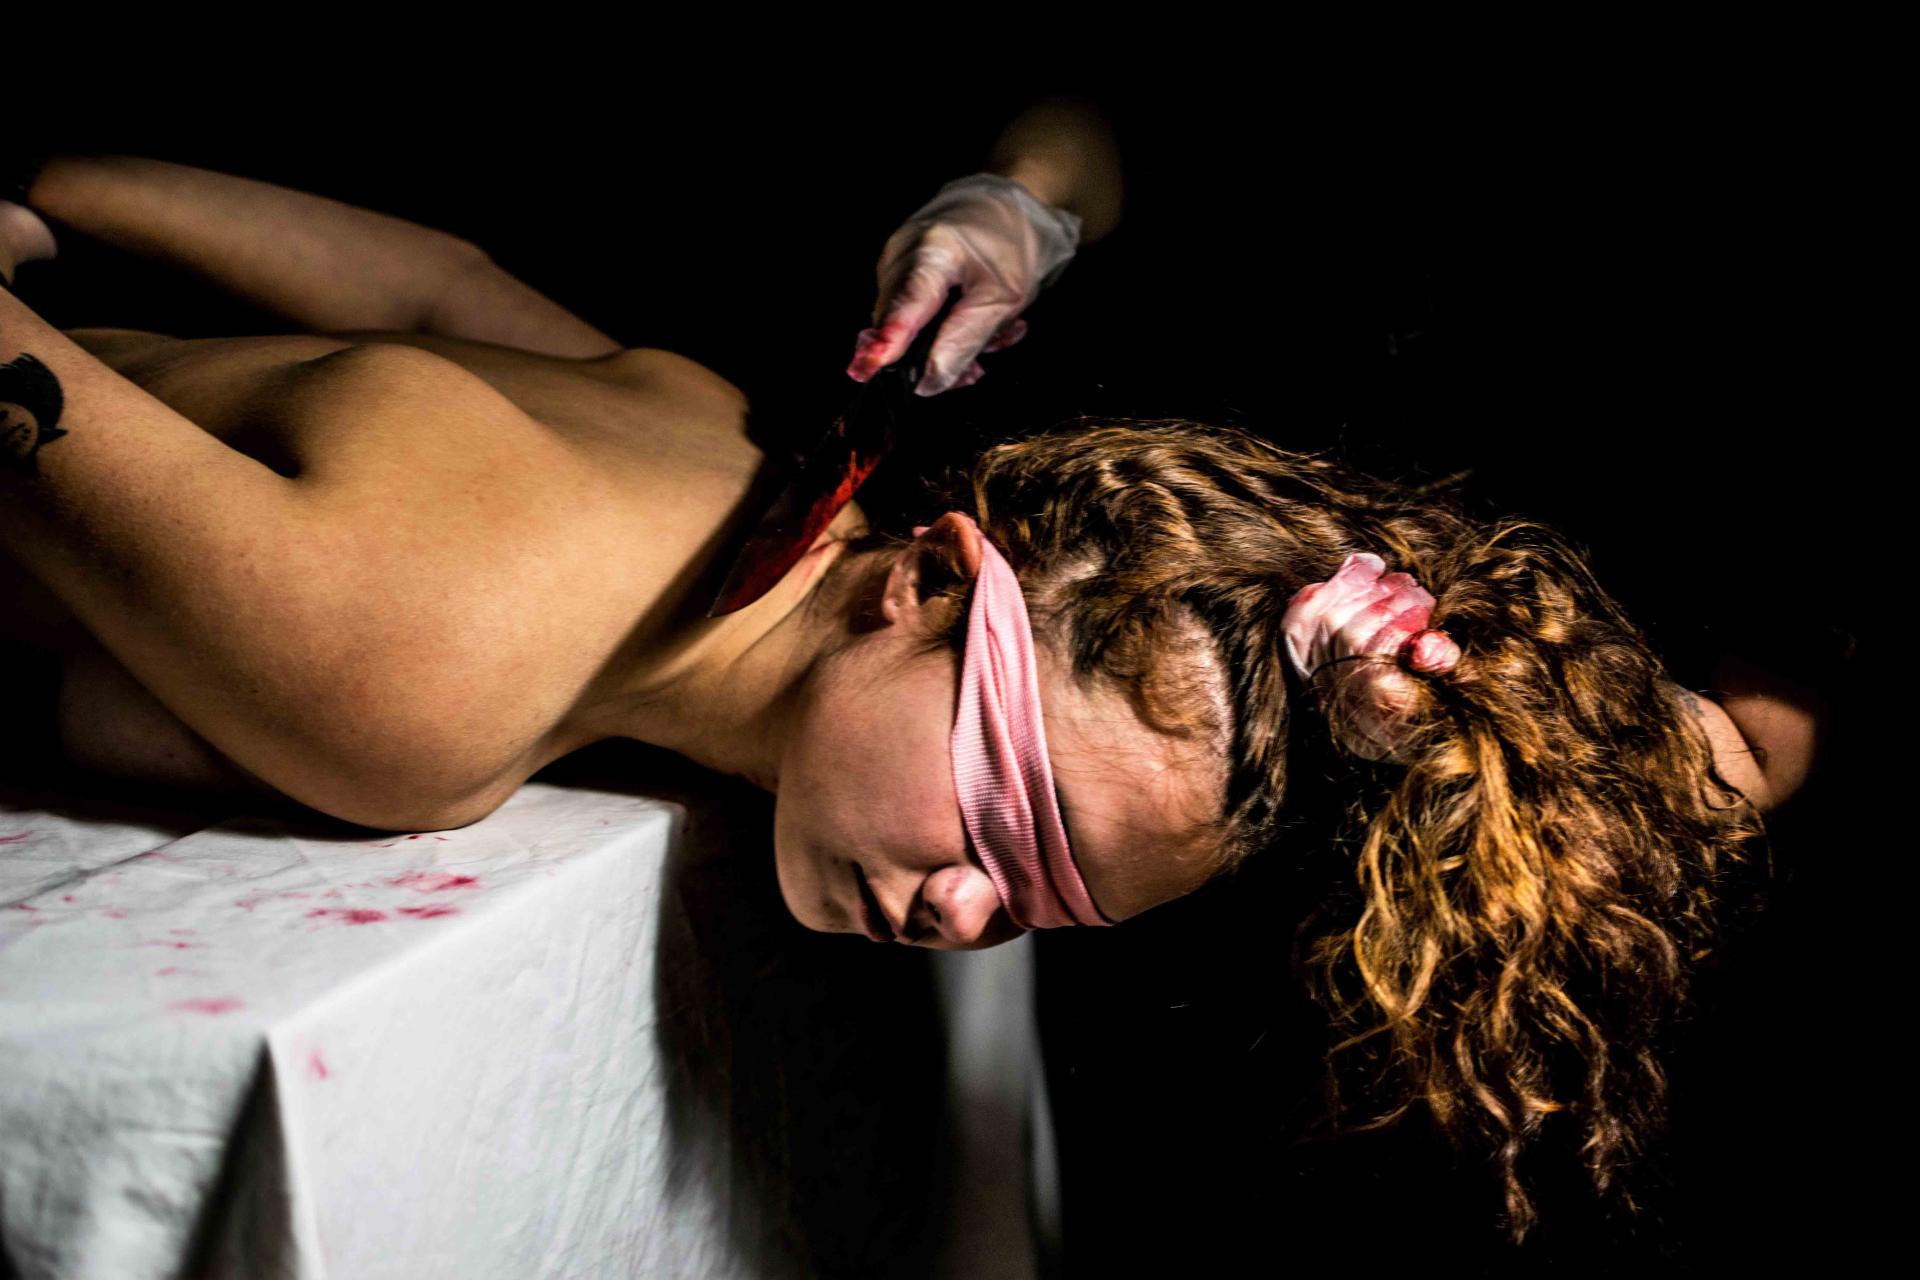 New York Photography Awards Winner - The abuse of women through their commercialization